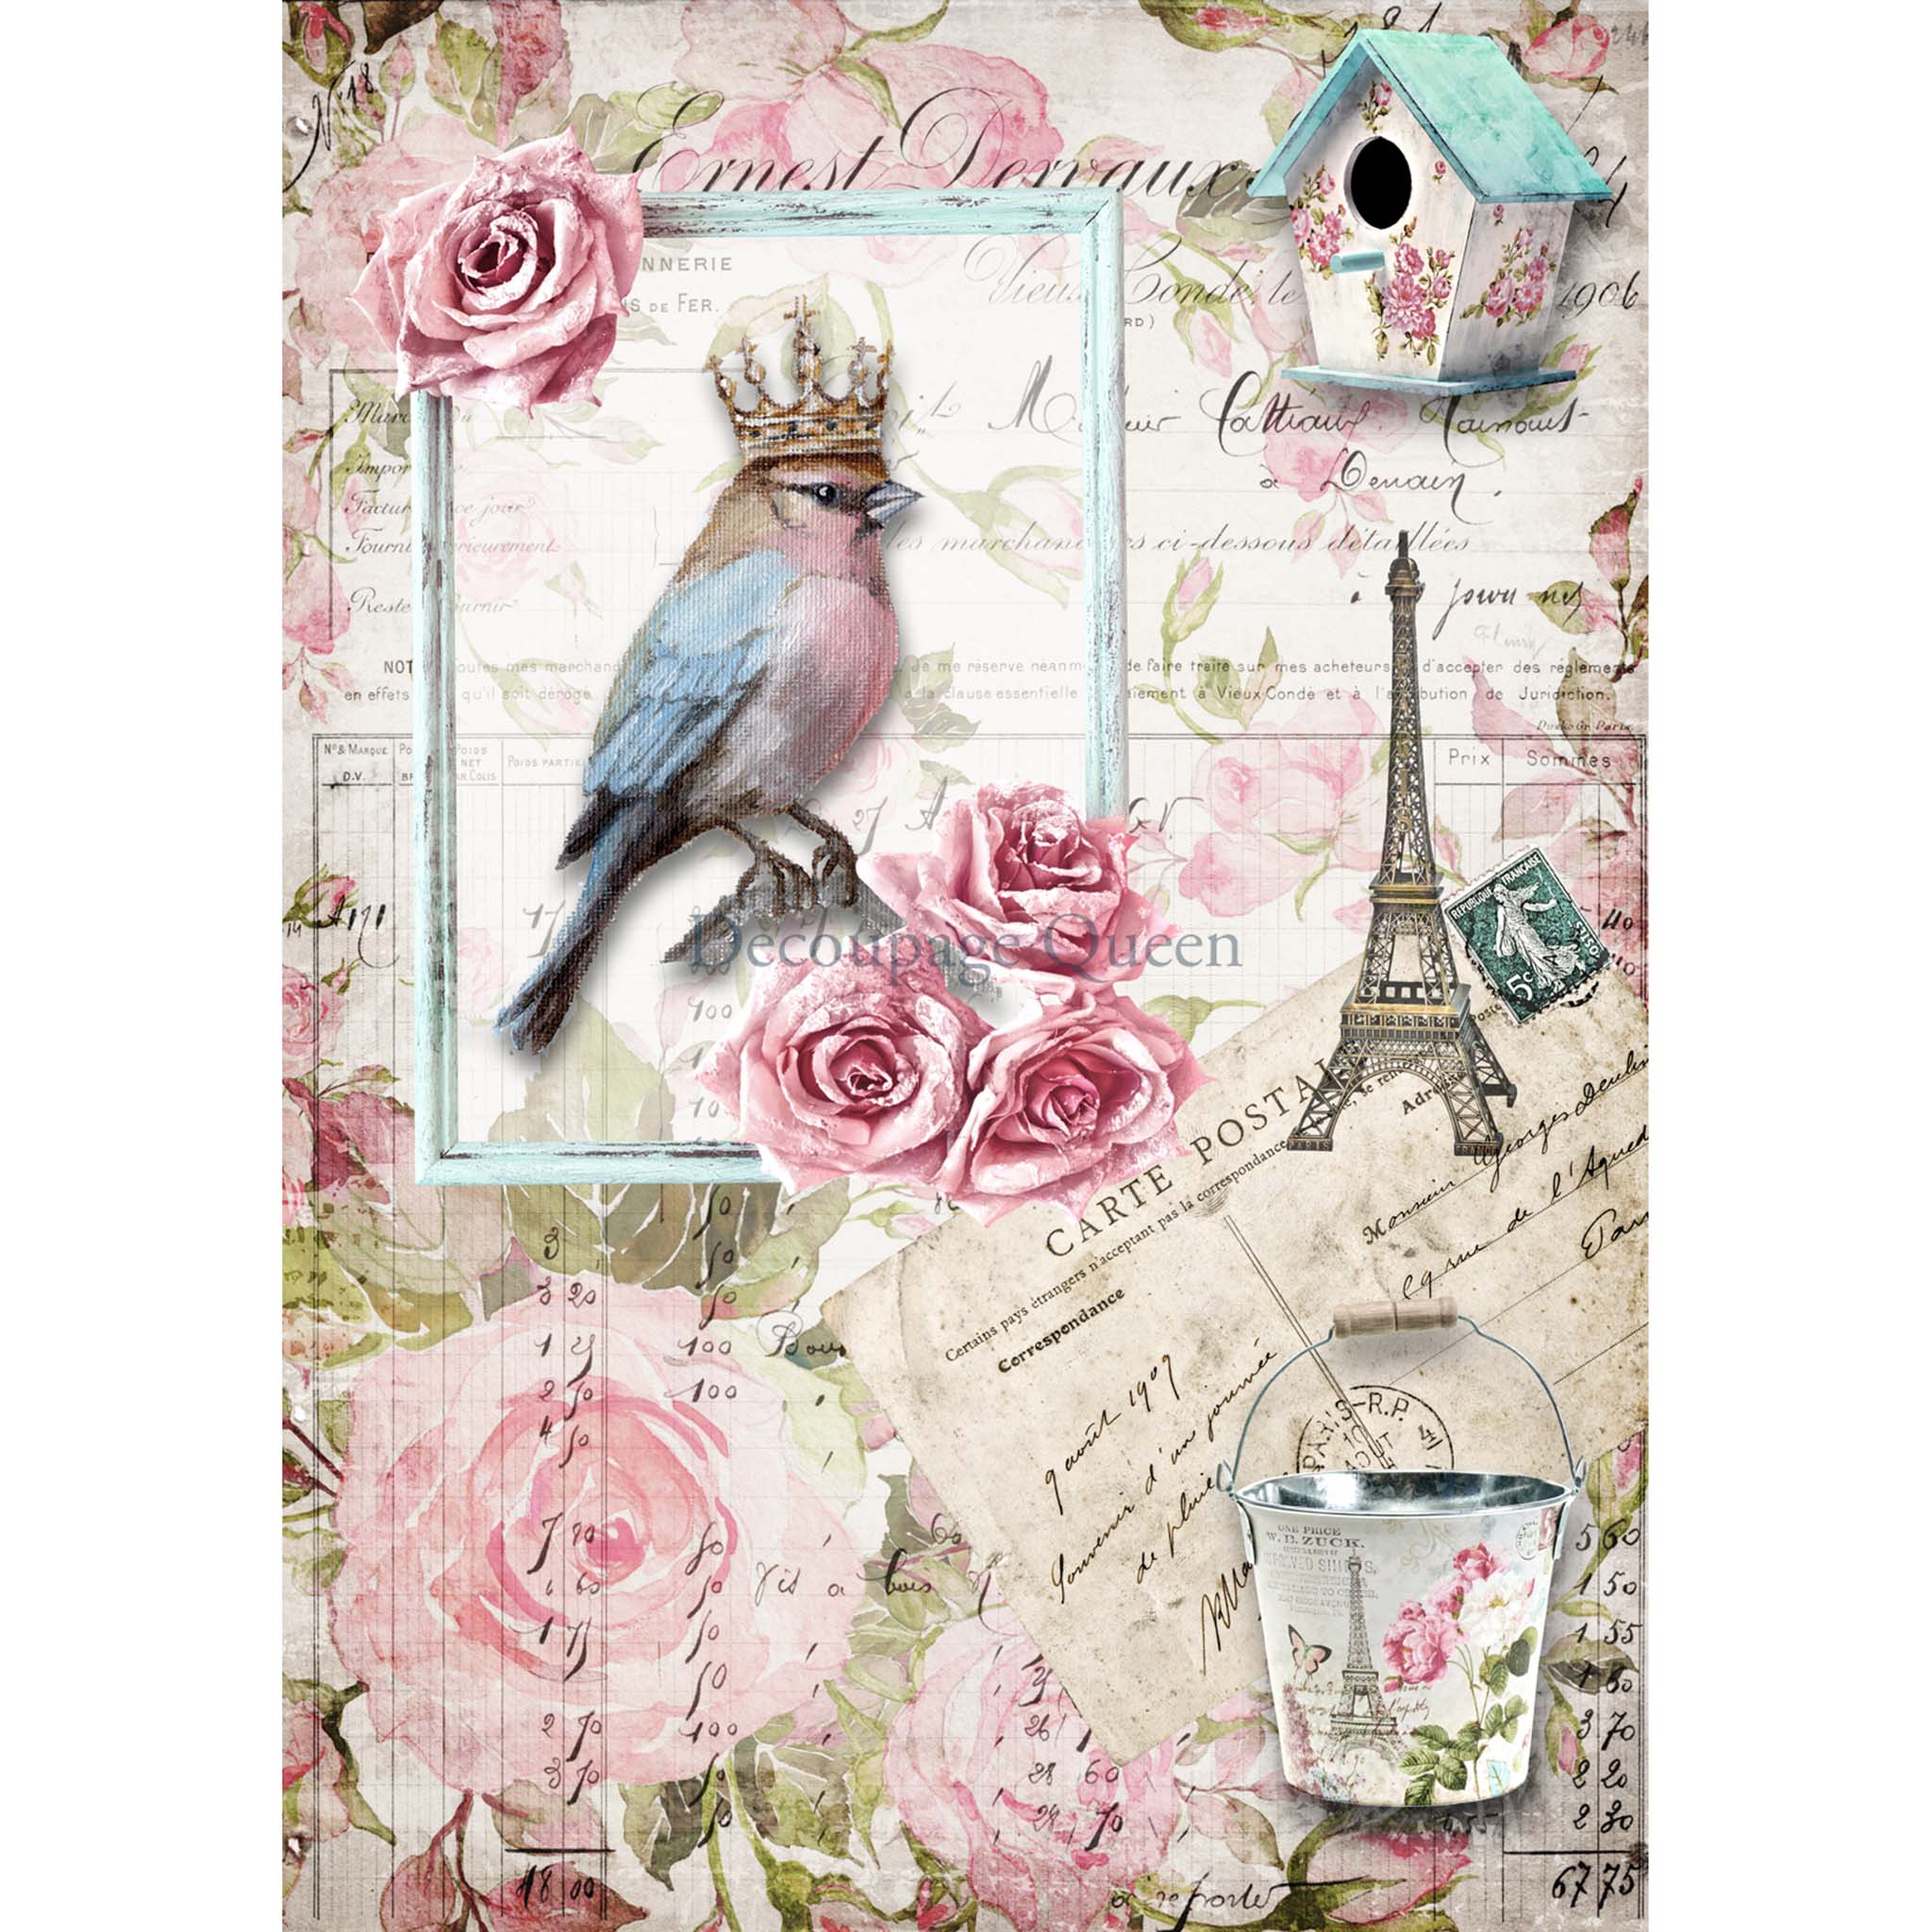 A3 rice paper design that features a small bird wearing a crown perched in a picture frame, surrounded by iconic Parisian elements like the Eiffel Tower, a birdhouse, and a French postcard against a floral background. White borders are on the sides.